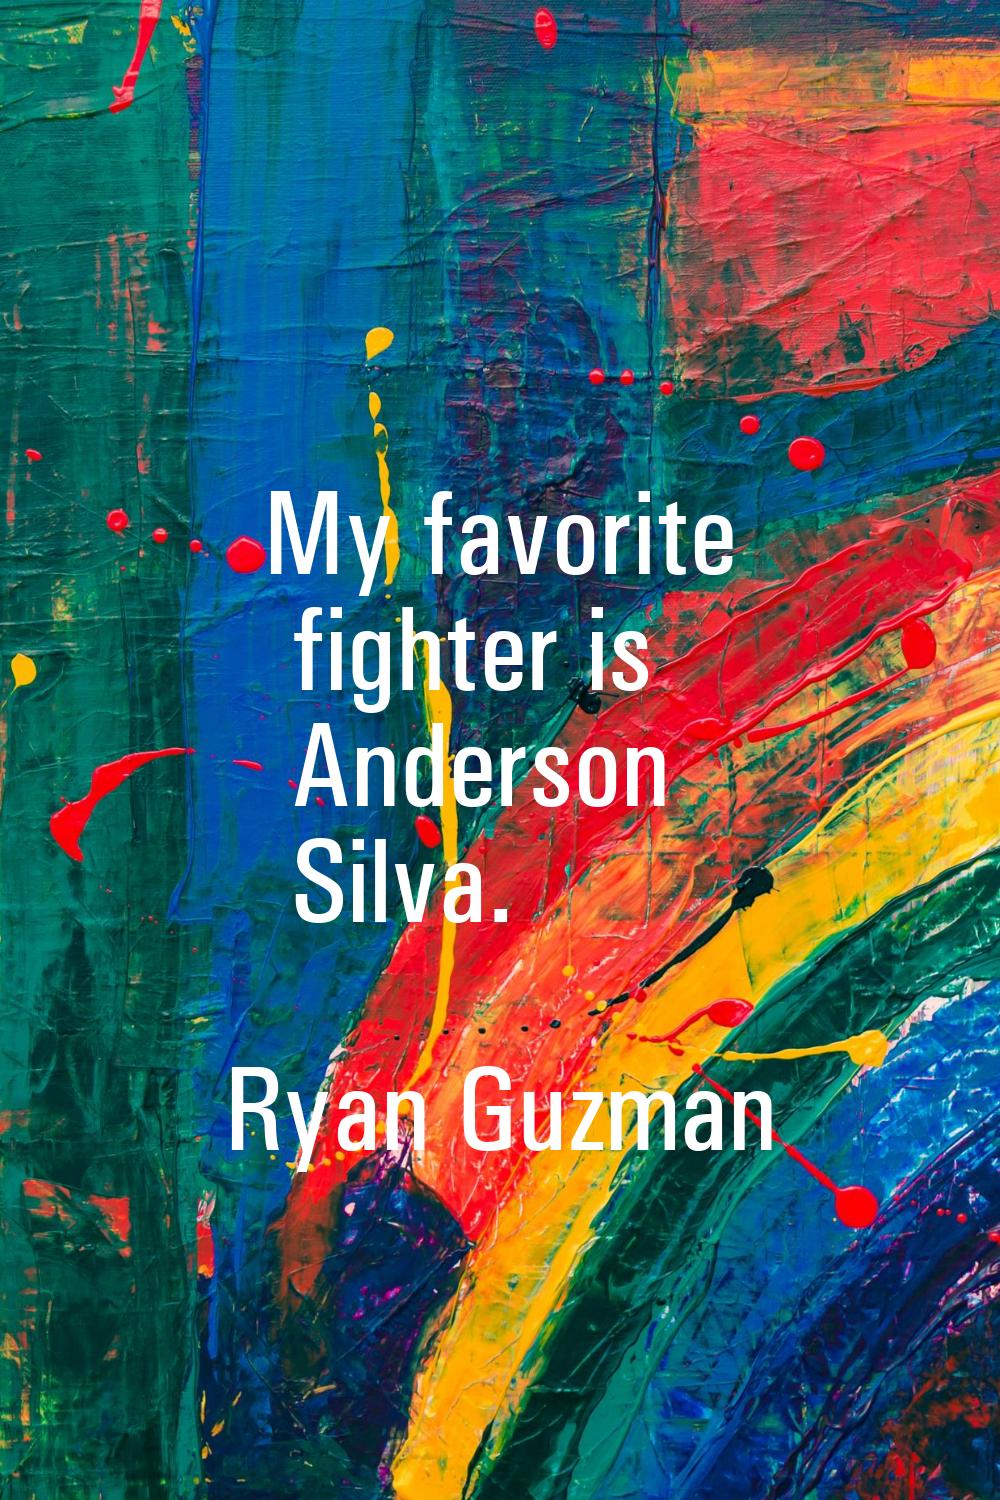 My favorite fighter is Anderson Silva.